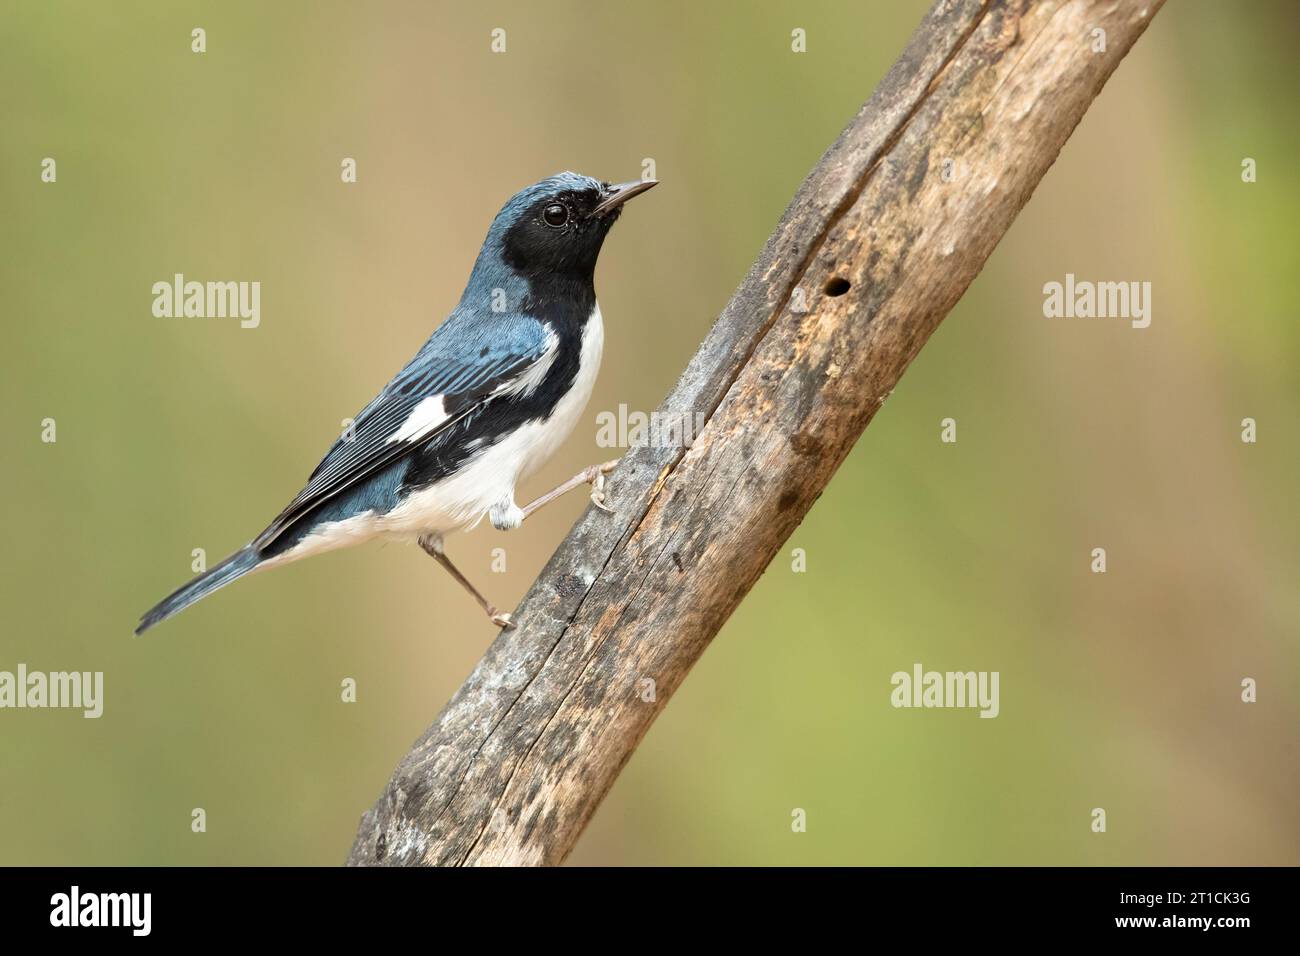 Black-throated blue warbler (Setophaga caerulescens) is a small passerine bird of the New World warbler family. Stock Photo